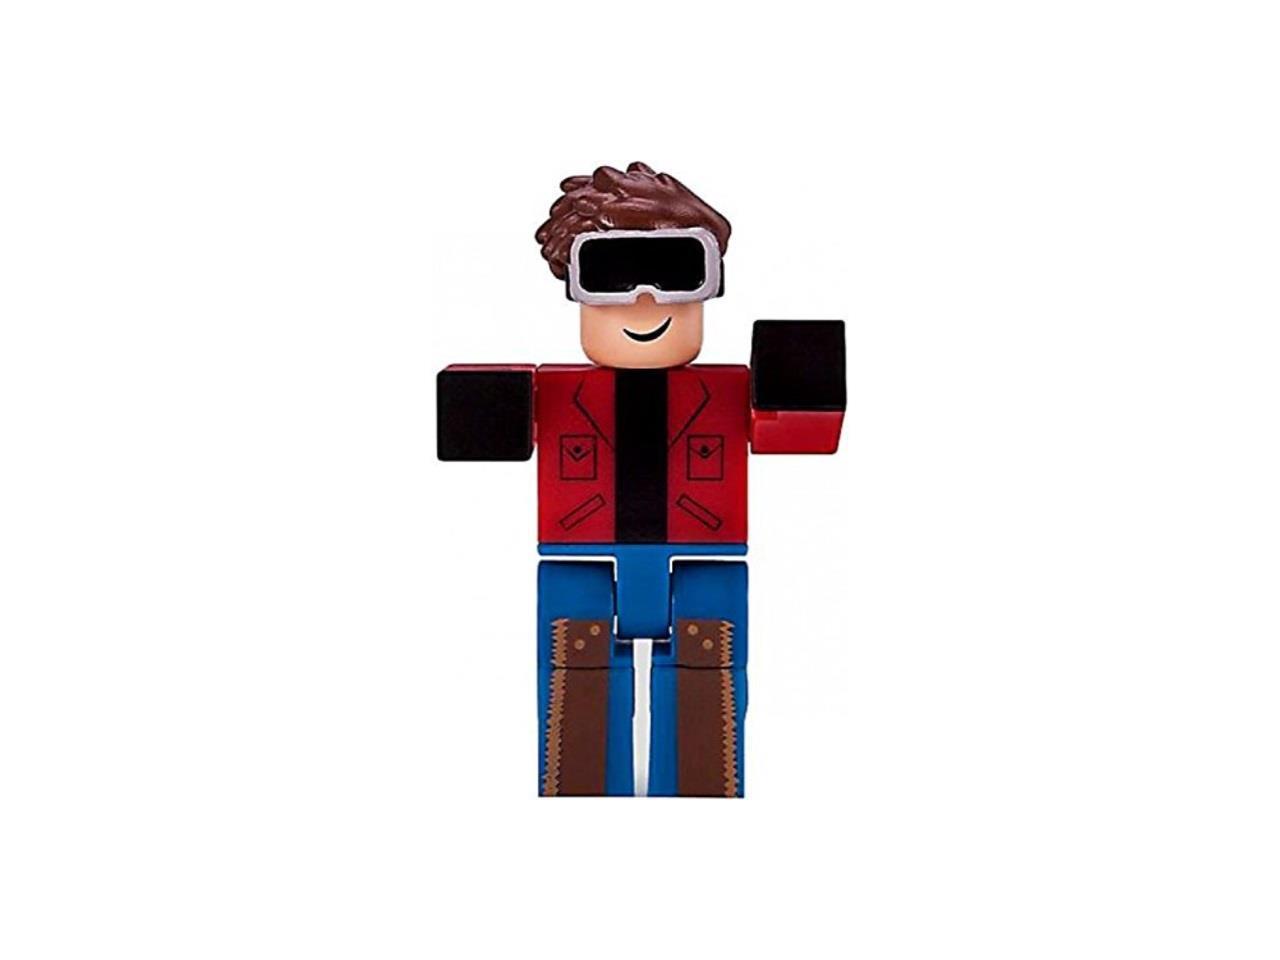 Roblox Series 1 Keith Action Figure Mystery Box Virtual Item Code 2 5 Newegg Com - roblox series 1 keith includes both the figure and code